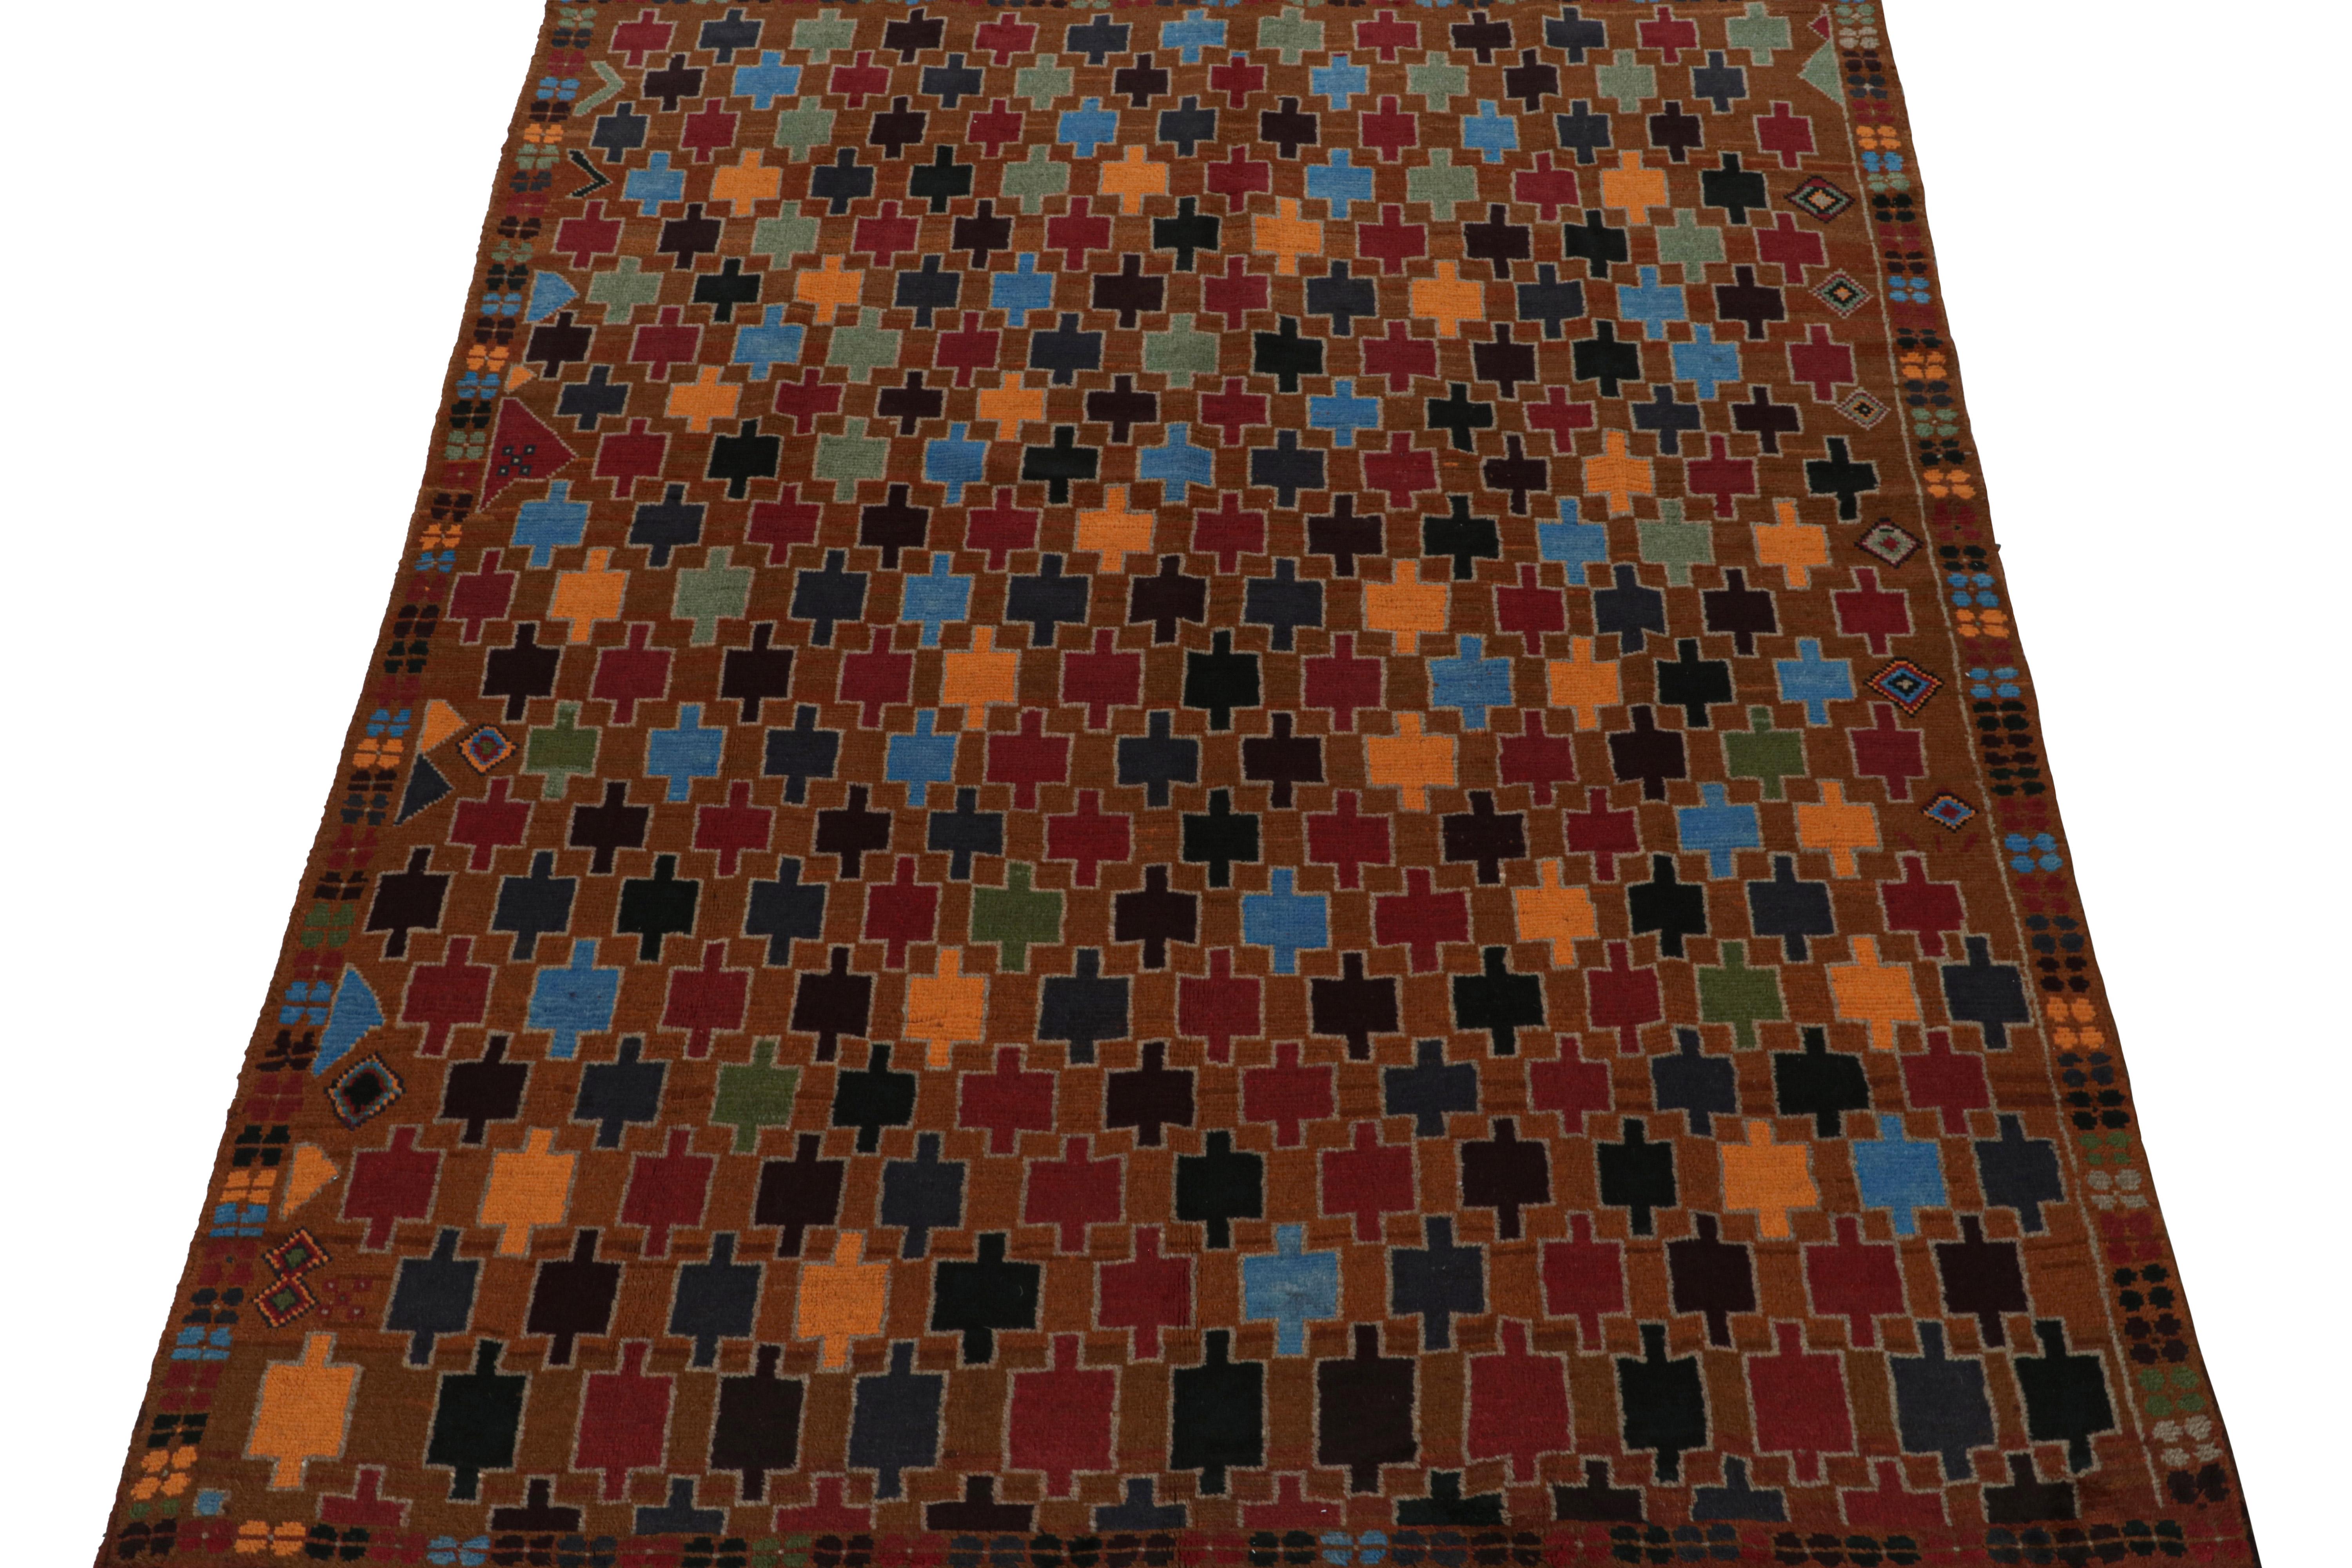 Afghan Rug & Kilim’s Baluch Tribal Rug with Colorful Geometric Patterns For Sale